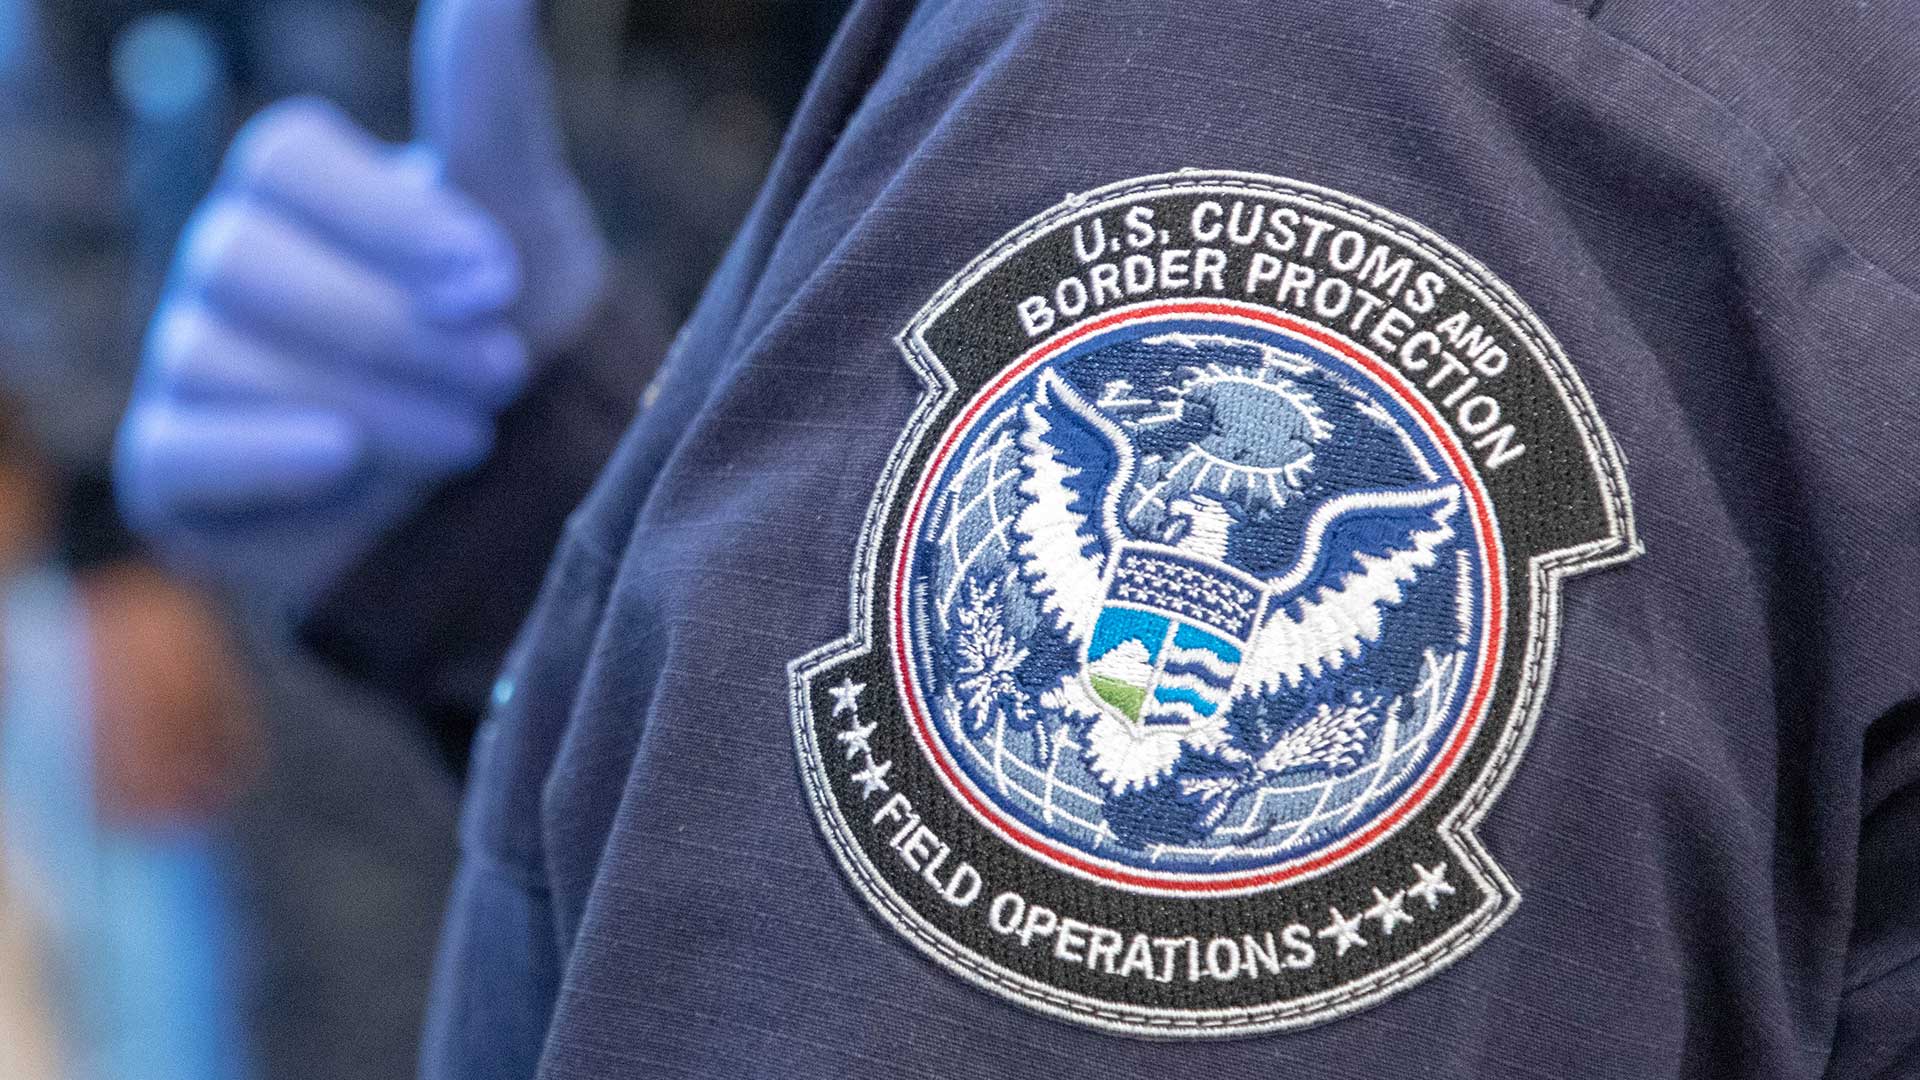 A Customs and Border Protection employee in 2018.